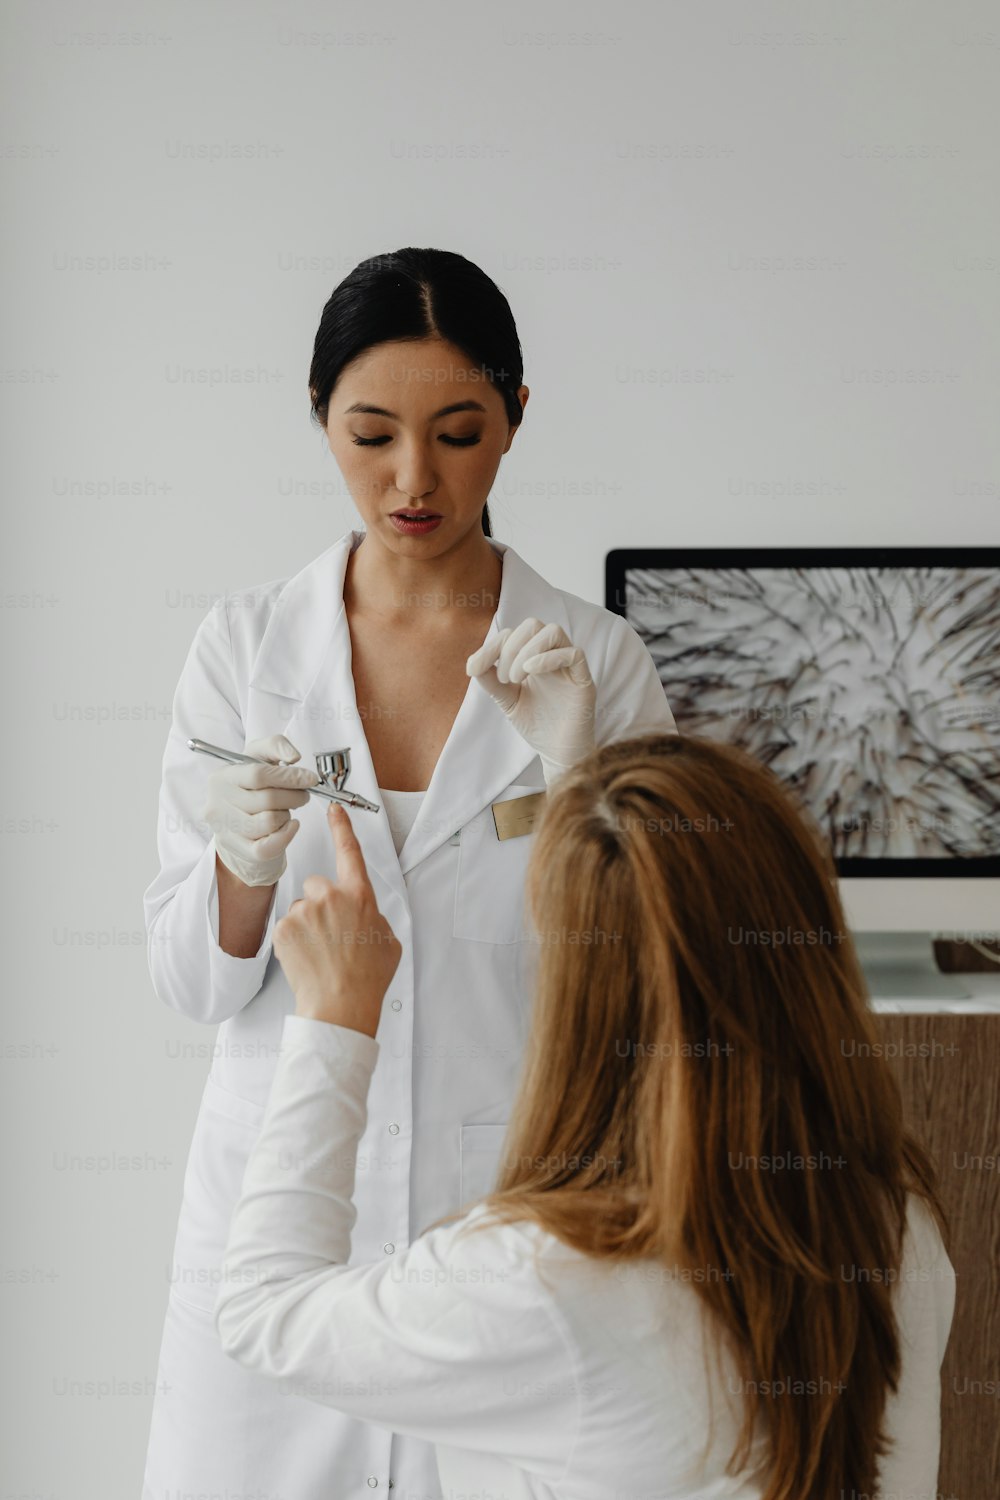 a woman in a white lab coat is cutting another woman's hair